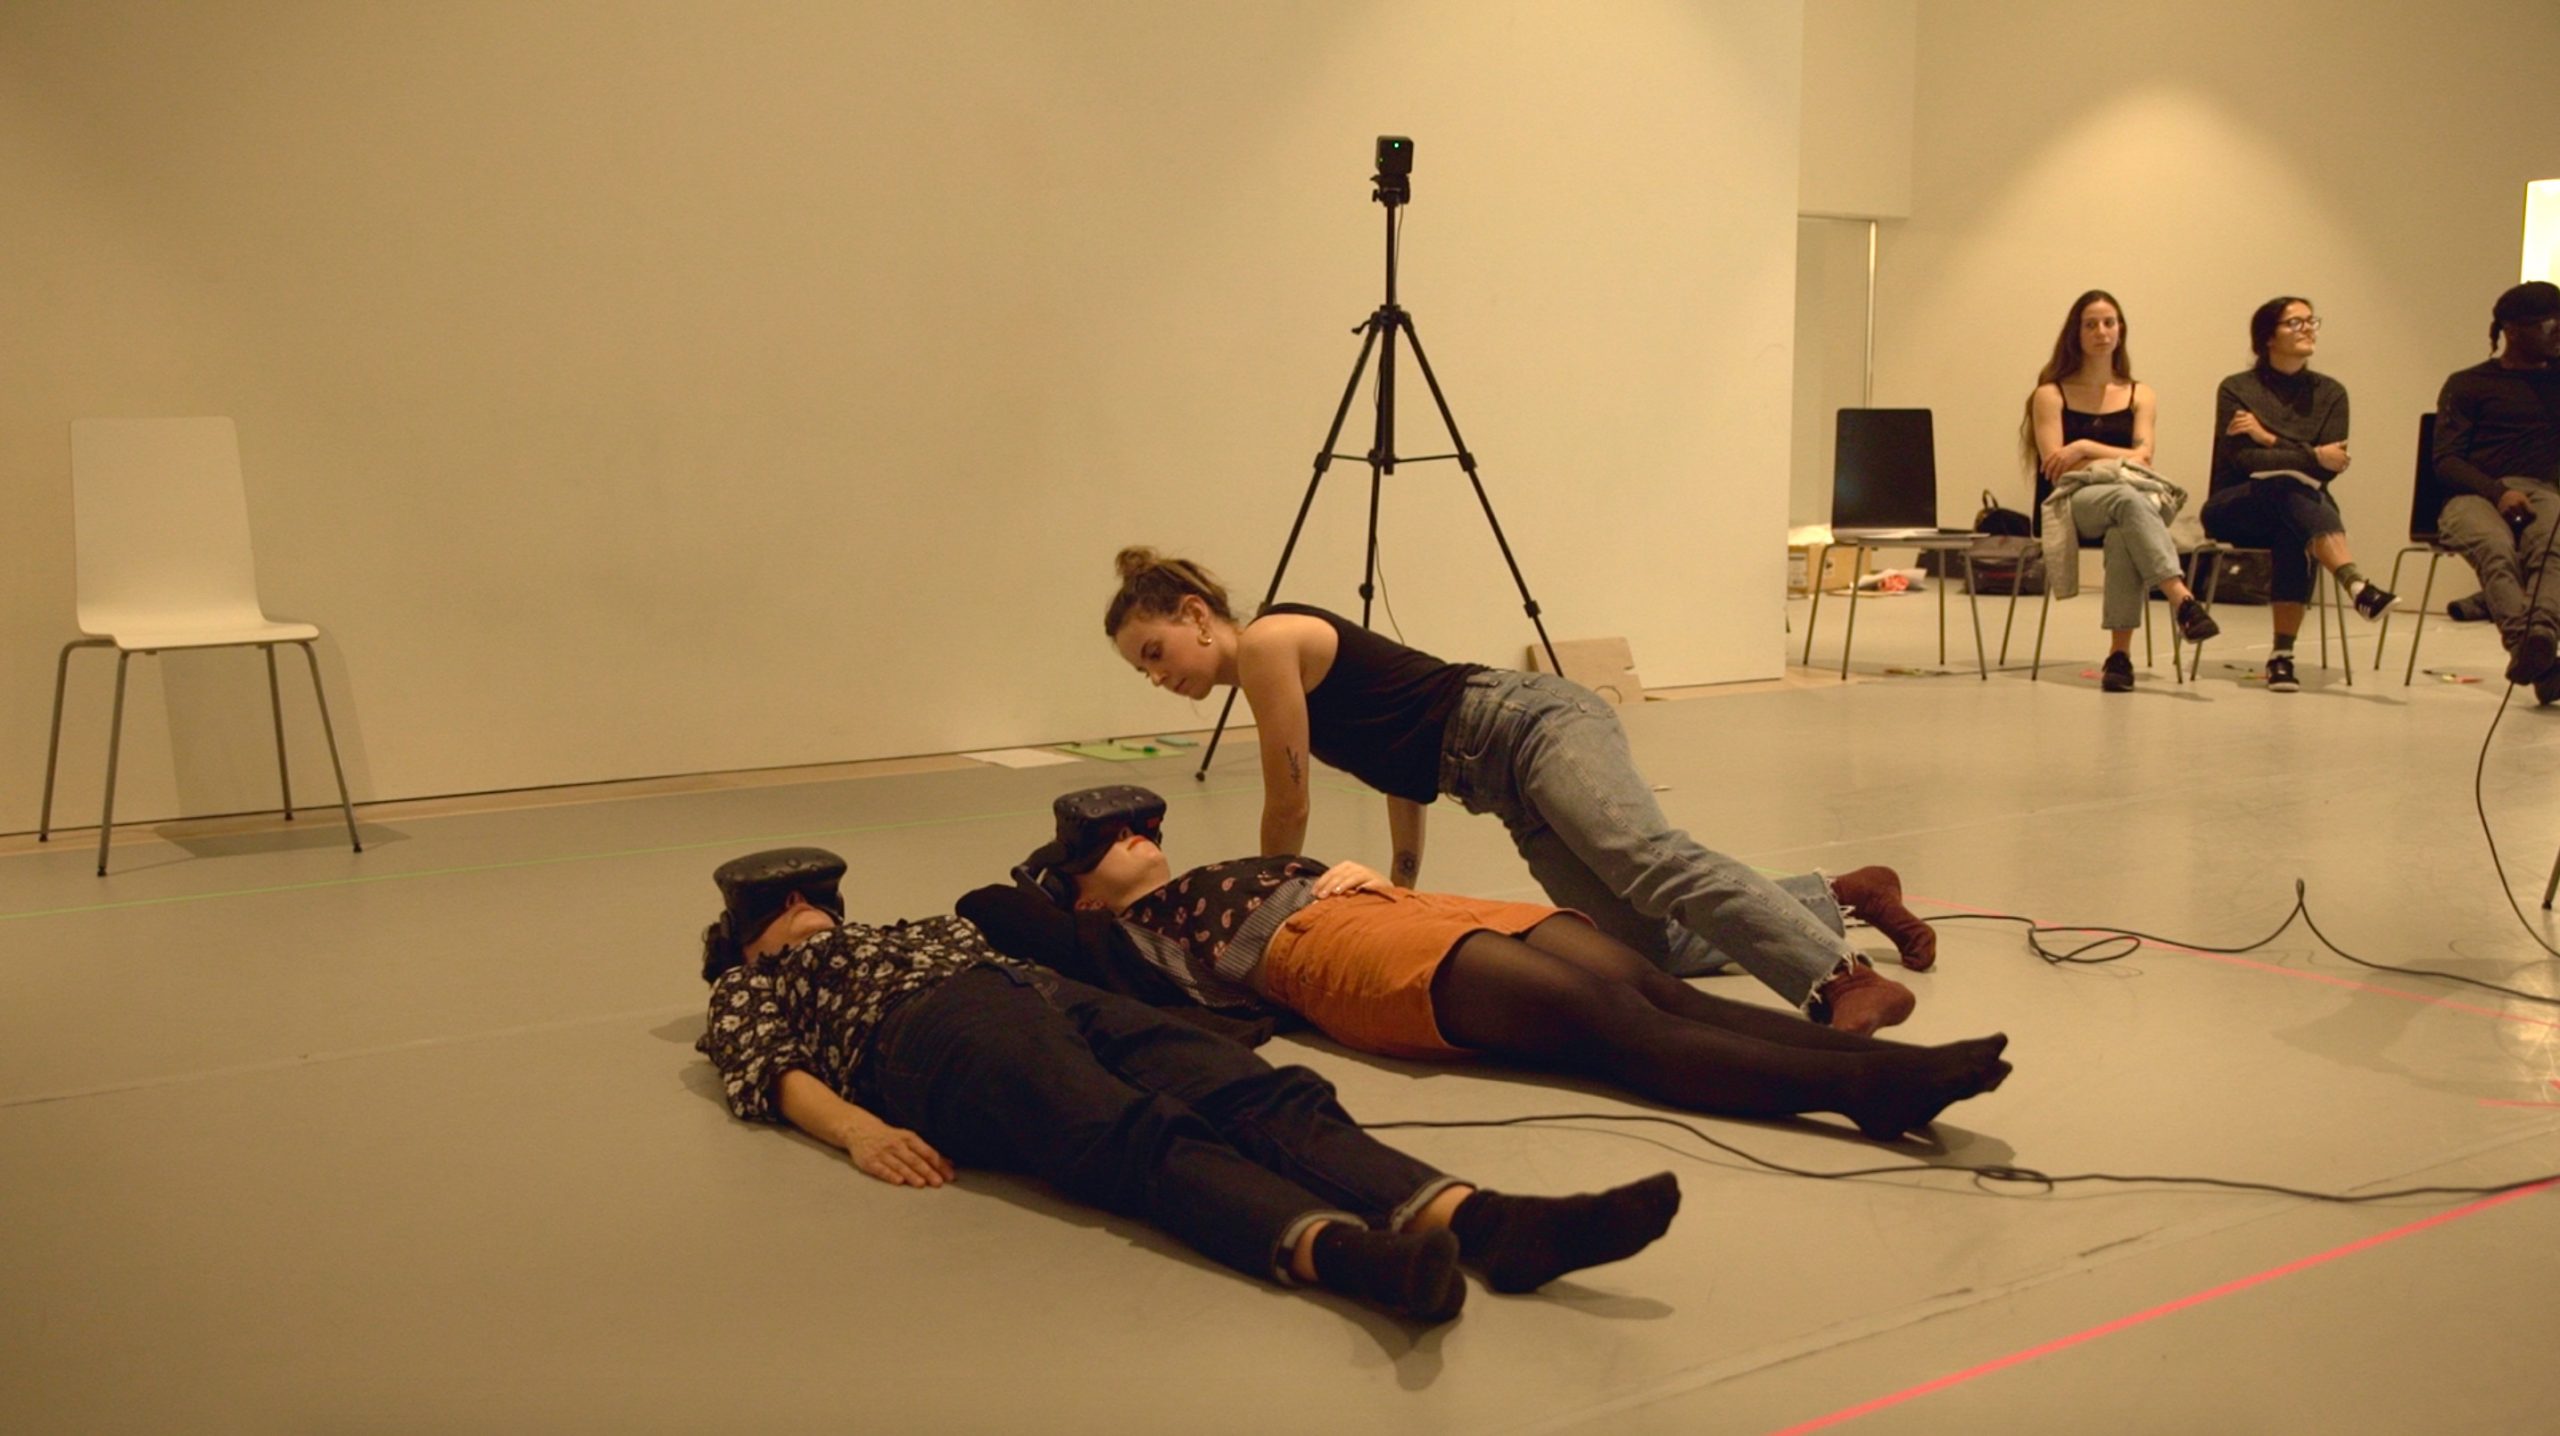 Two people laying on the floor in a room.